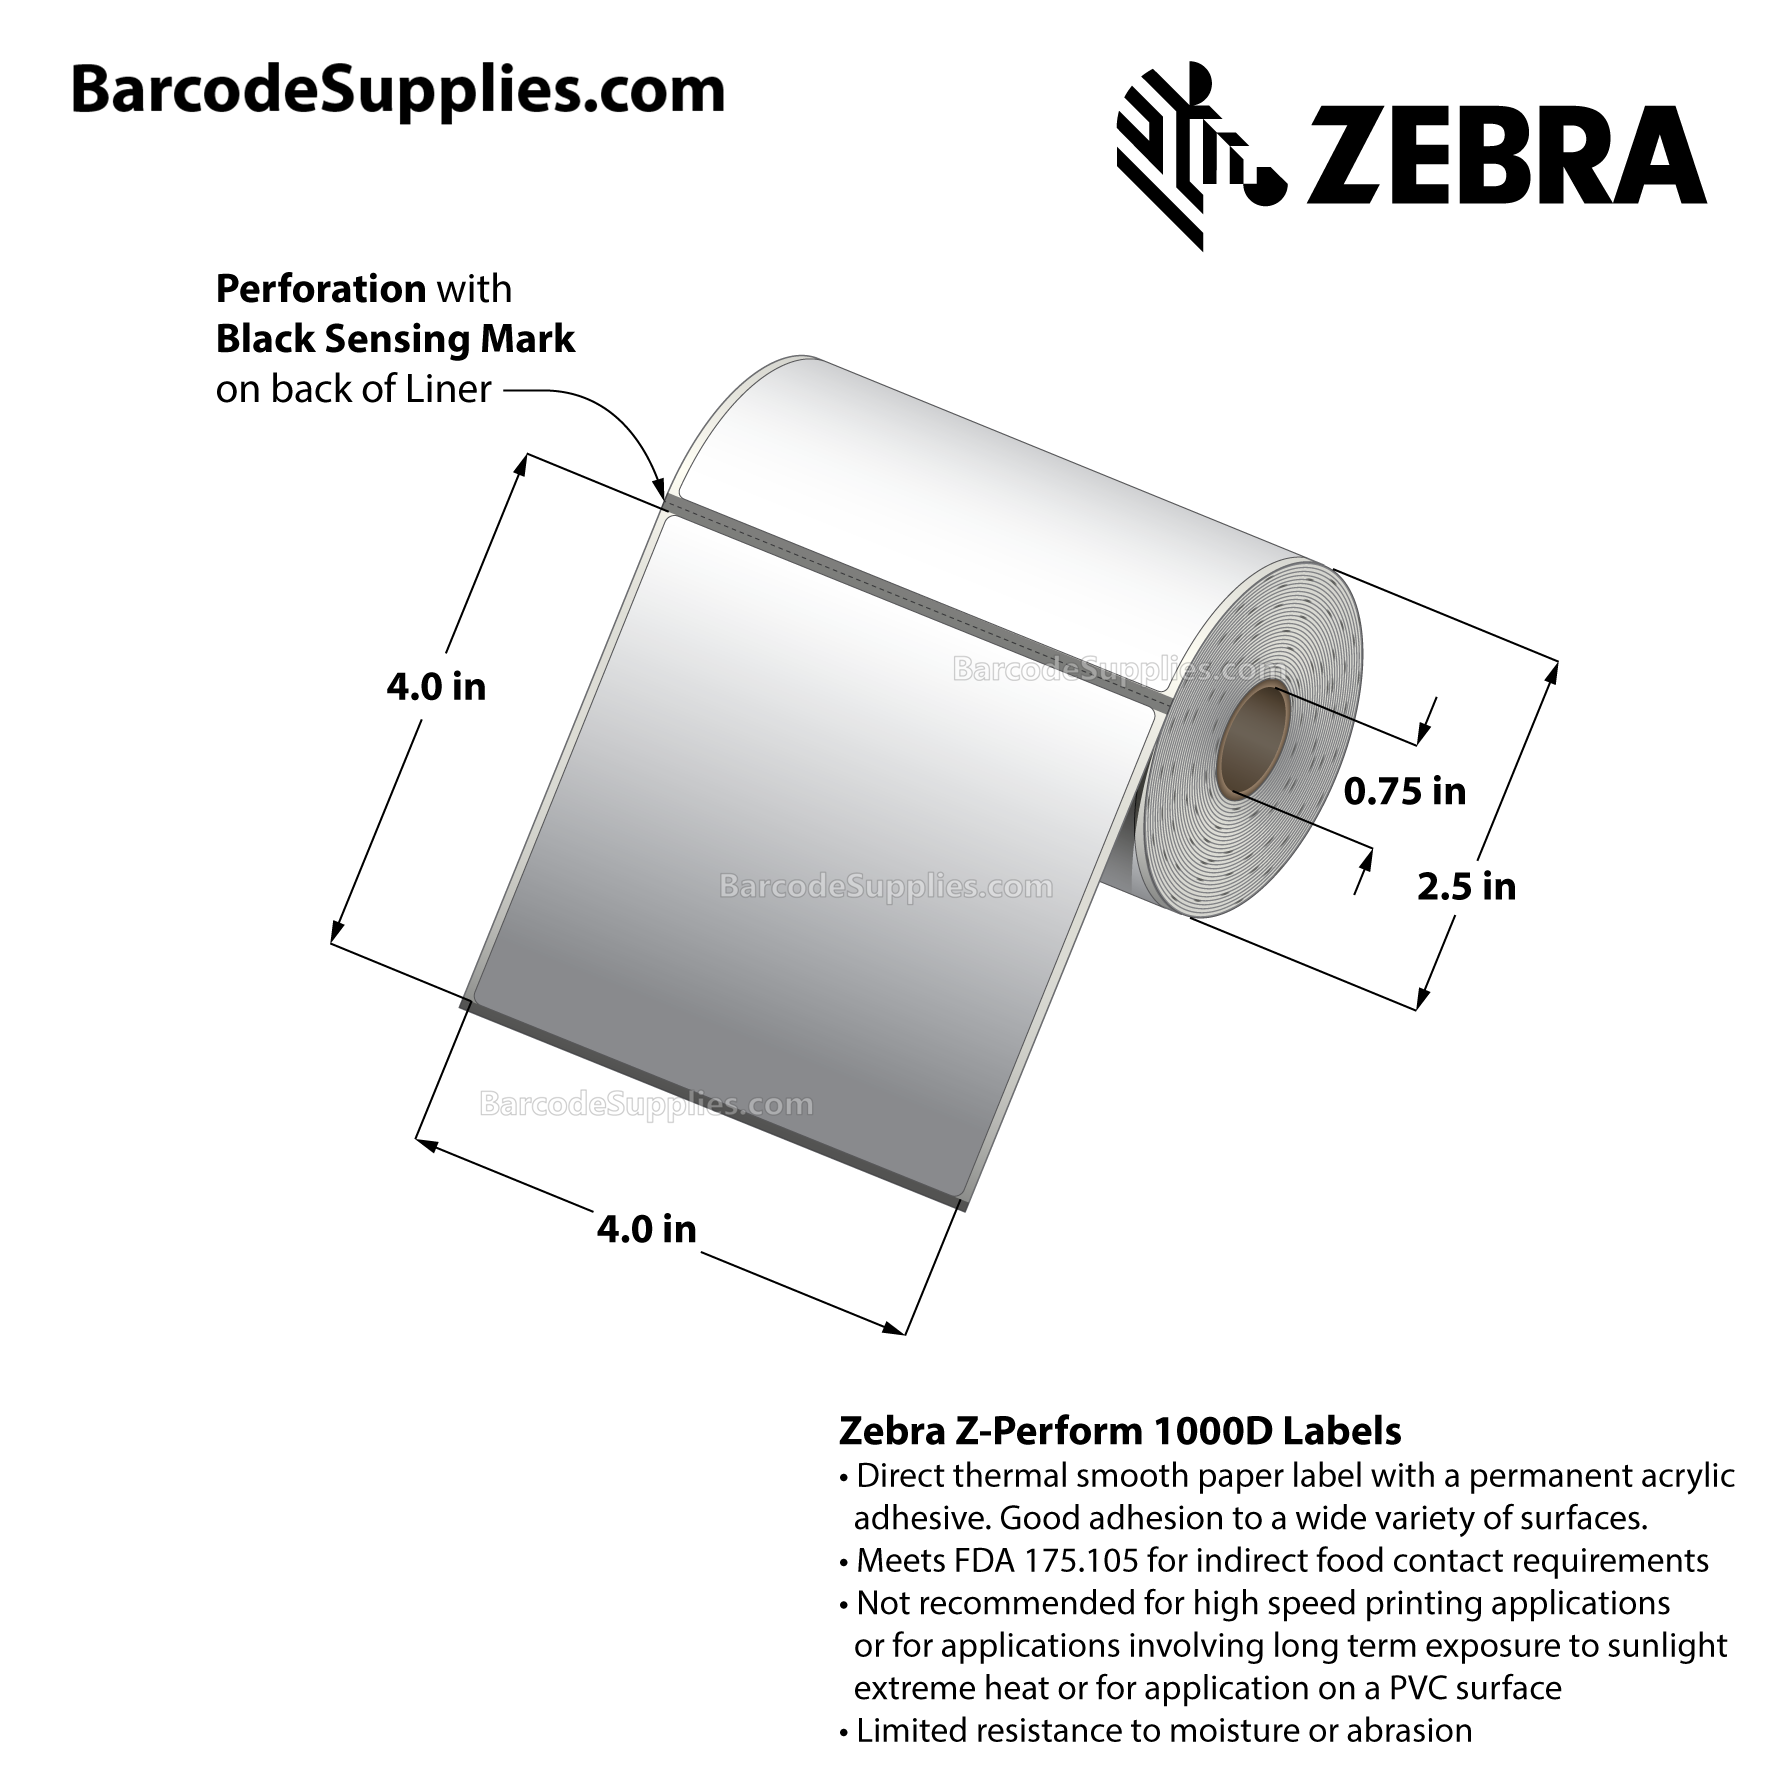 4 x 4 Direct Thermal White Z-Perform 1000D Labels With Permanent Adhesive - Black mark sensing - Perforated - 160 Labels Per Roll - Carton Of 36 Rolls - 5760 Labels Total - MPN: LD-R3AK5B